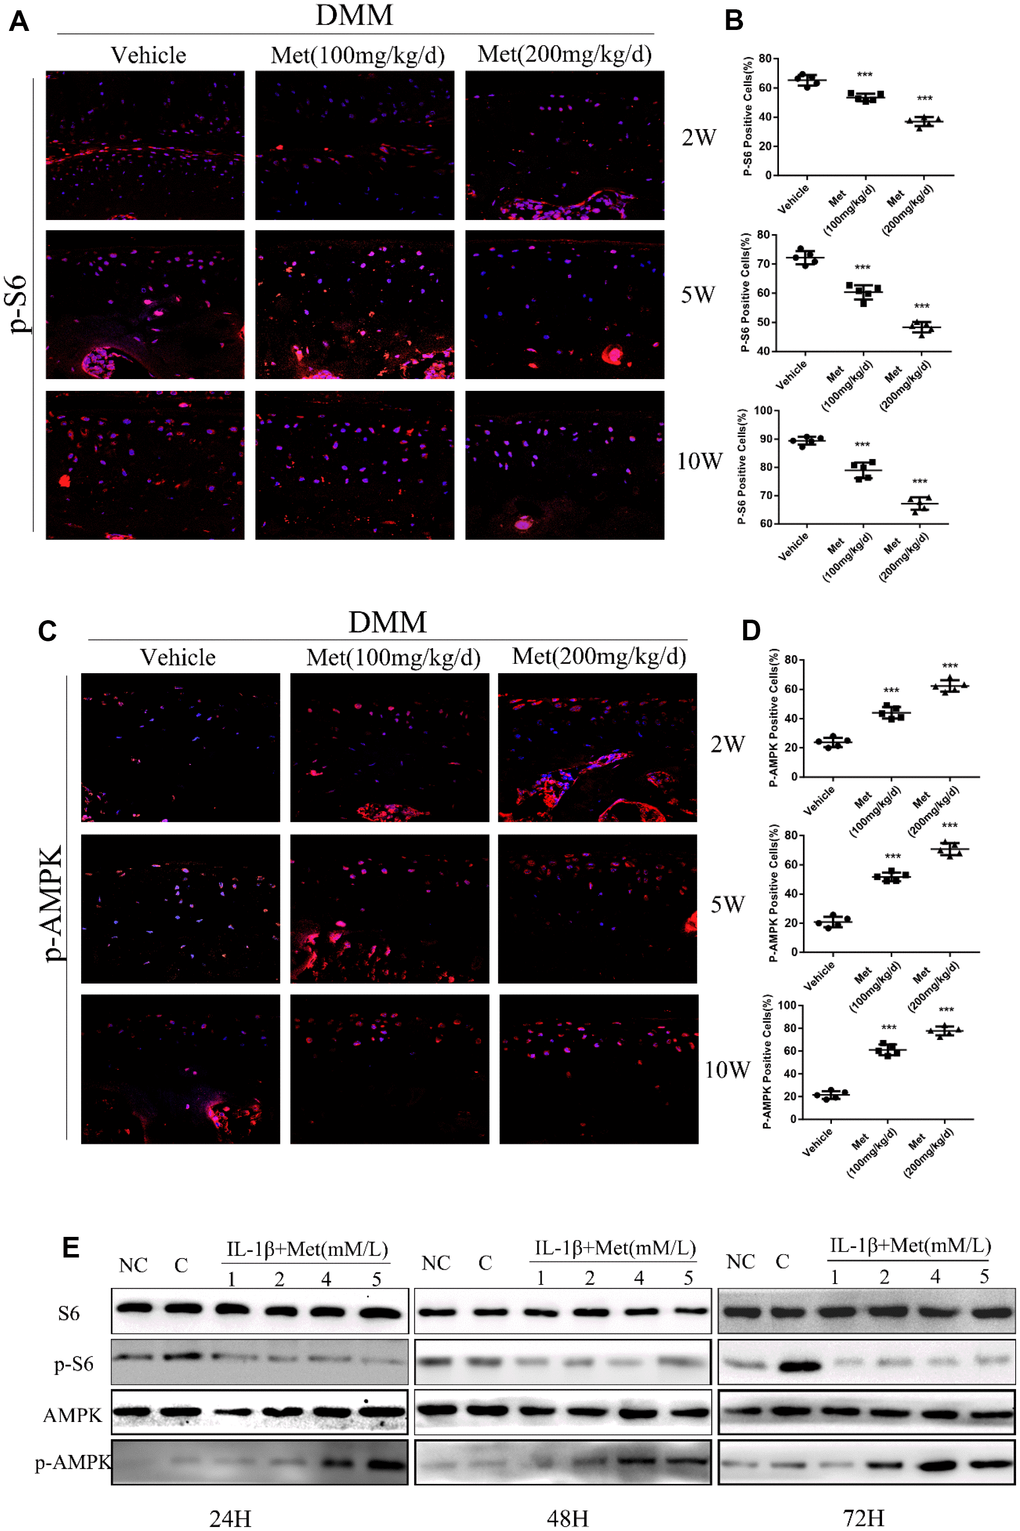 Metformin reduces the expression of p-S6 protein and affects the expression of other related pathway proteins. (A) Immunofluorescence detection of p-S6 in tibial cartilage at 2, 5, and 10 weeks after destabilization of the medial meniscus (DMM) surgery. (B) Quantitation of cells positively stained for p-S6. ***P C) Immunofluorescence detection of p-AMPK in tibial cartilage at 2, 5, and 10 weeks after DMM surgery. (D) Quantitation of cells positively stained for p-AMPK. ***P E) the western blot analyses of the protein expression levels of selected proteins in primary chondrocytes which were induced with IL-1β (10 ng/mL) and co-cultured with metformin (1, 2, 4, and 5 mM) for 24 h, 48 h and 72 h. (NC = normal control, C = IL-1β).